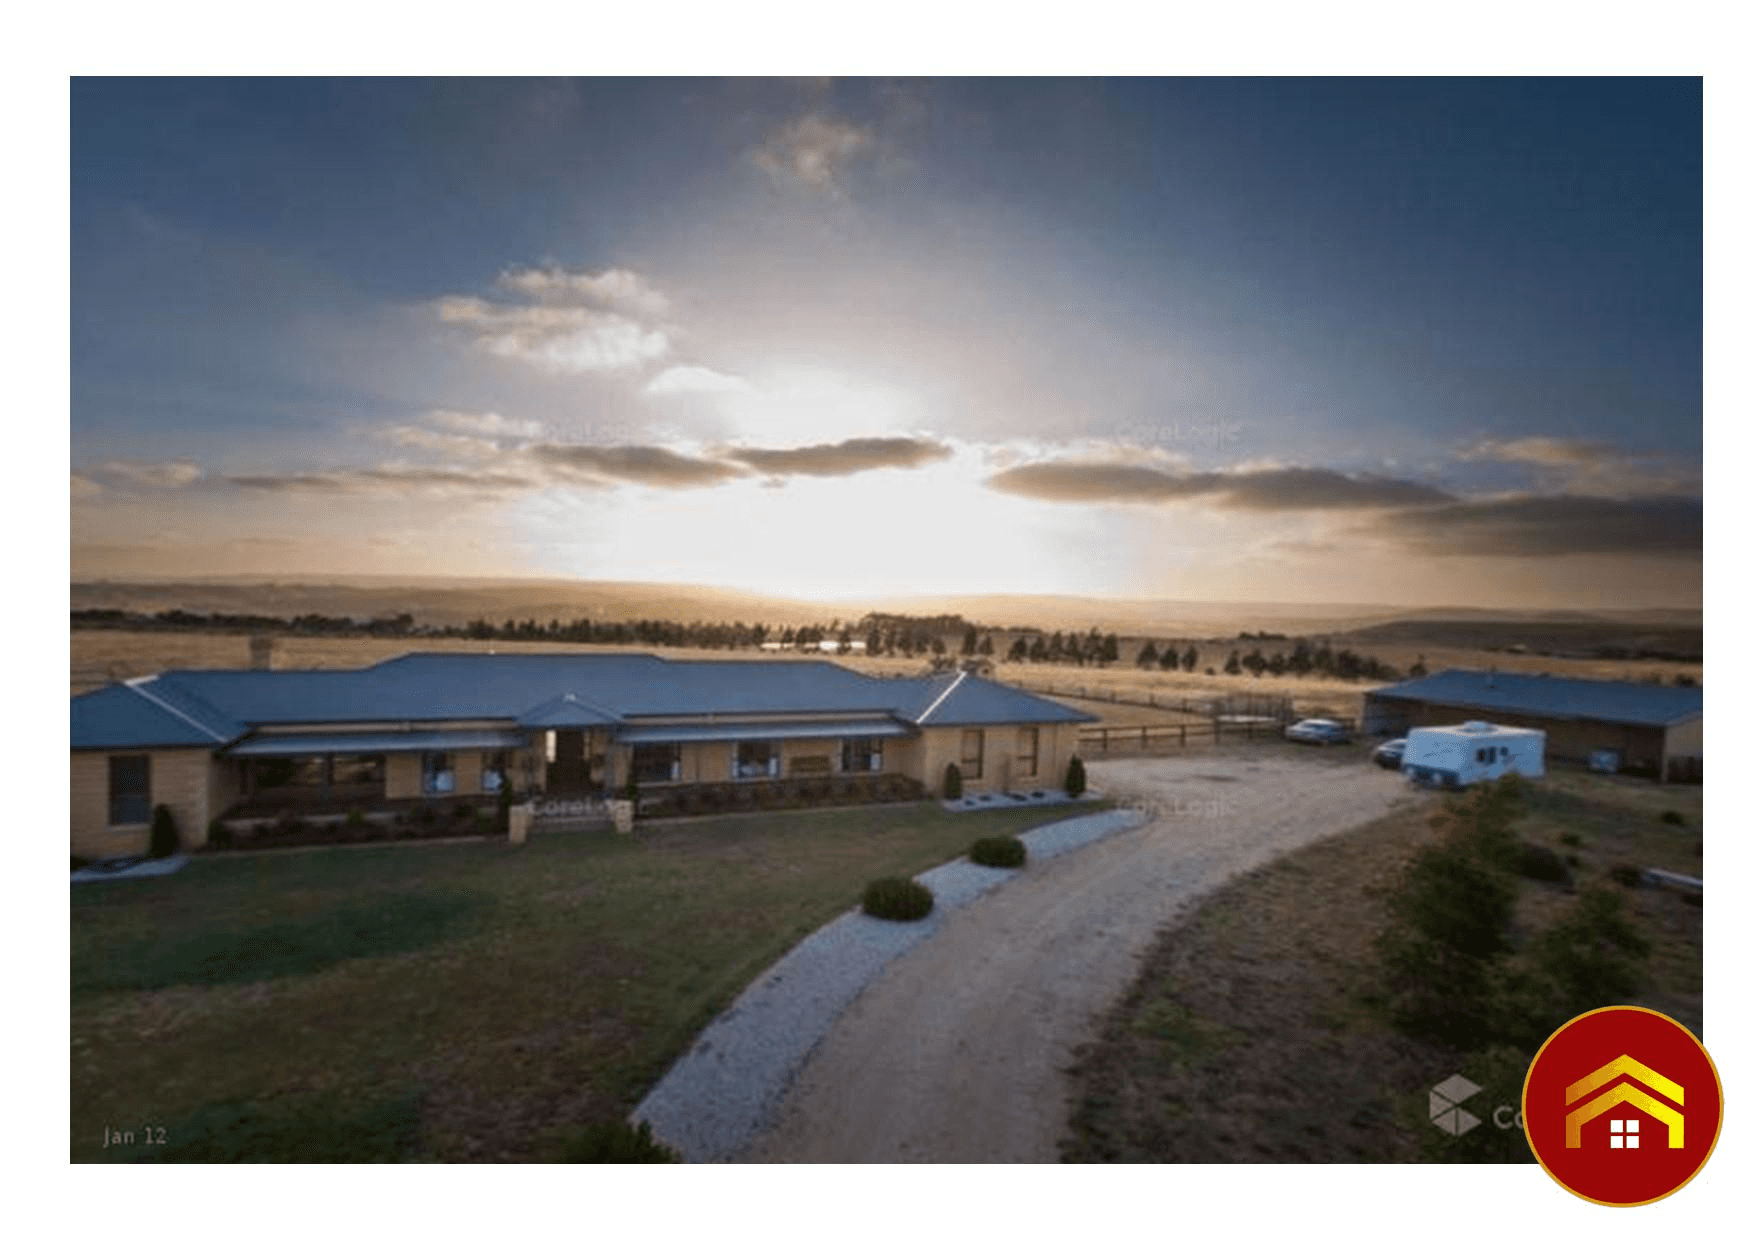 161 Paces Lane, ROWSLEY, VIC 3340